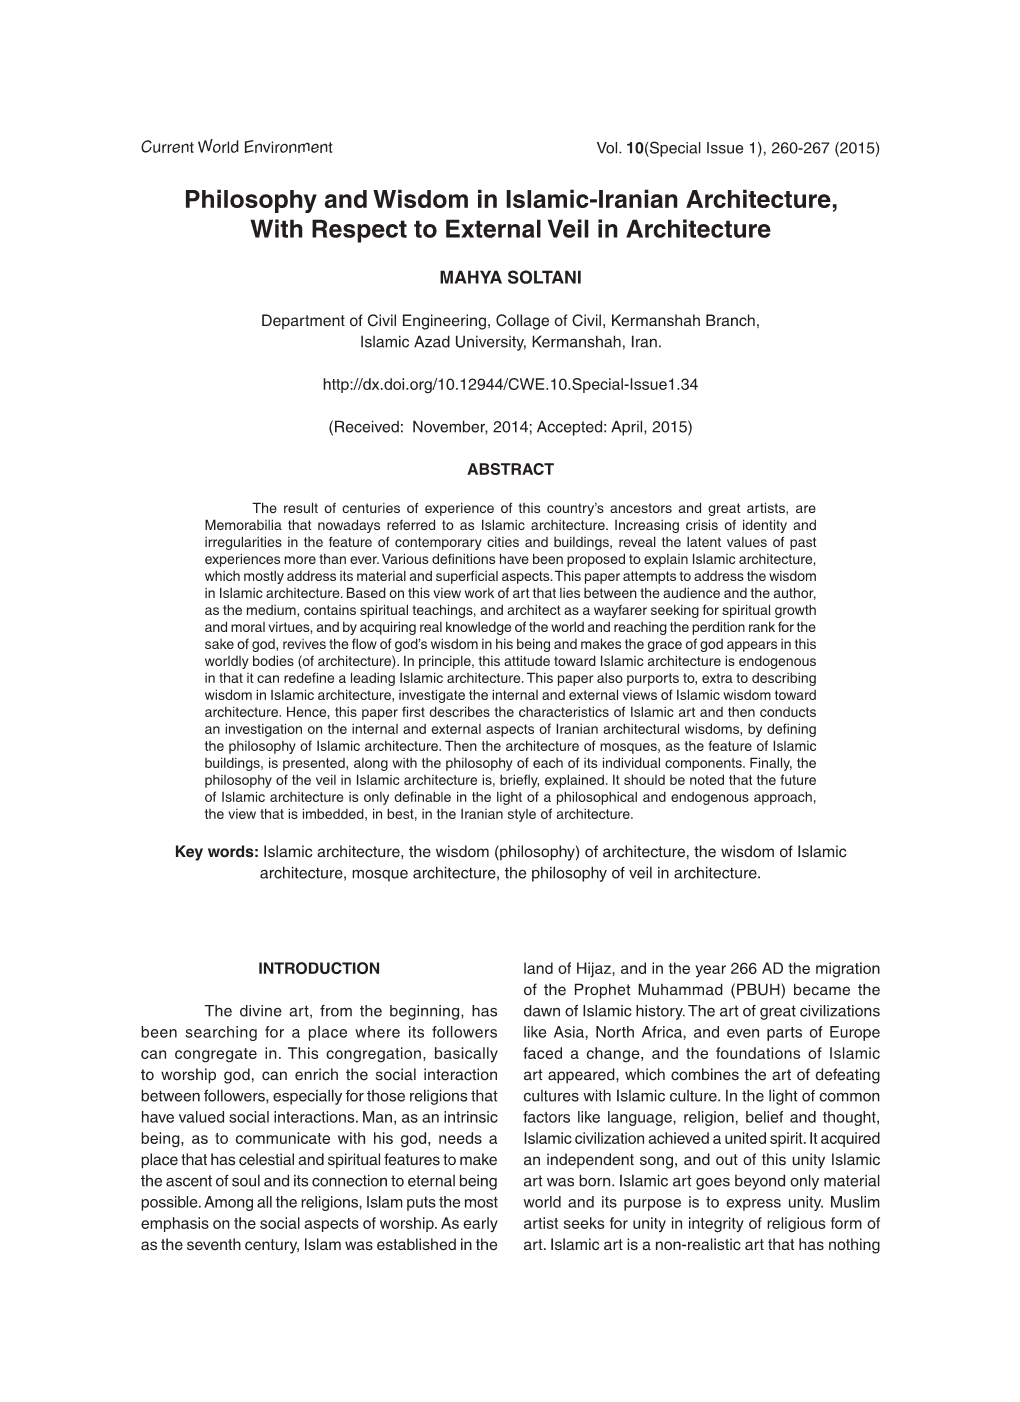 Philosophy and Wisdom in Islamic-Iranian Architecture, with Respect to External Veil in Architecture